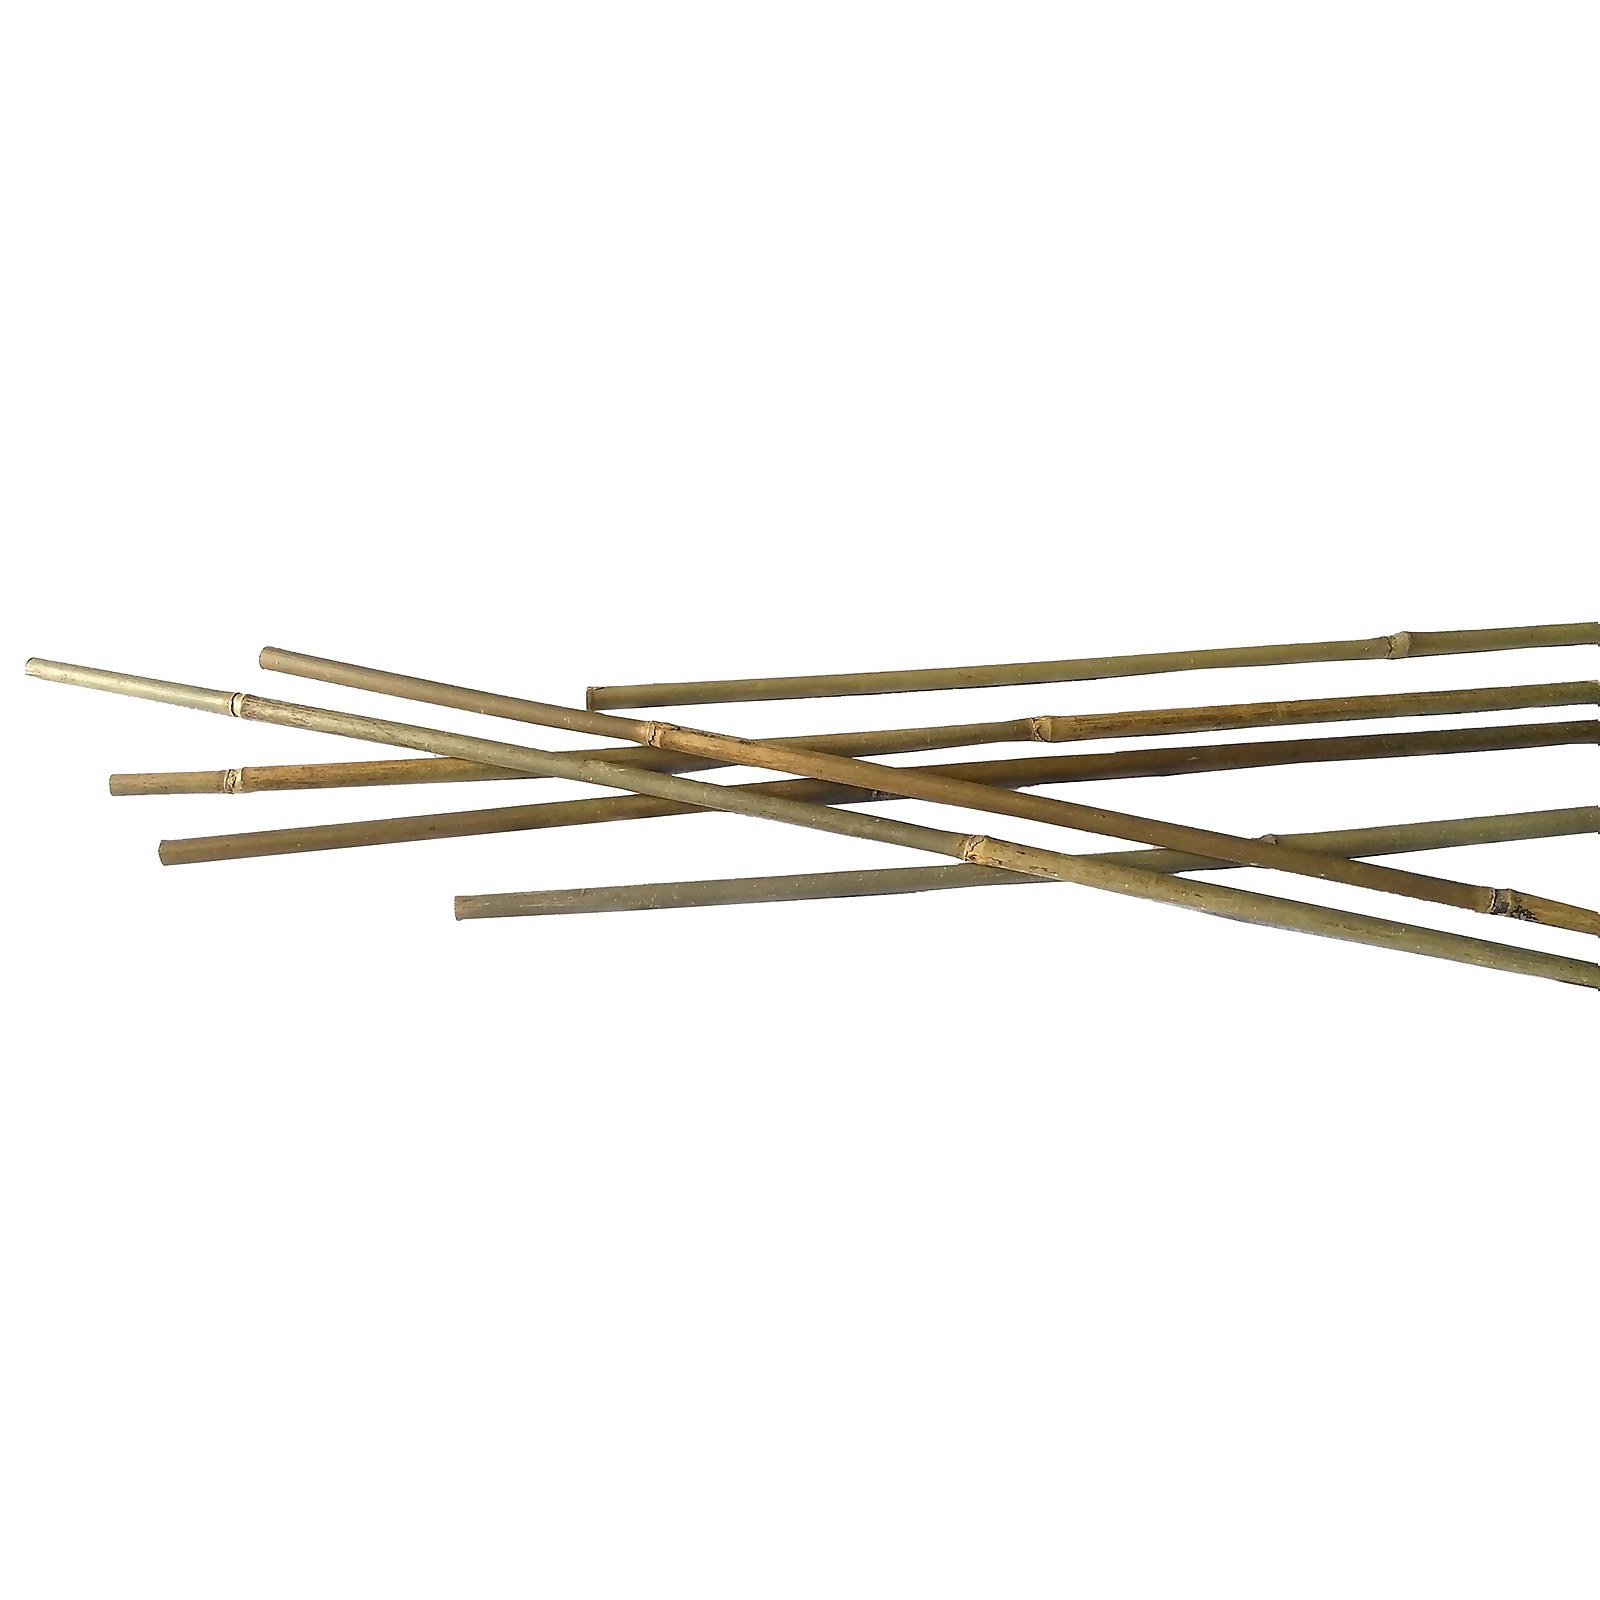 Photo of 10 Pack Bamboo Canes - 2.1m/7ft